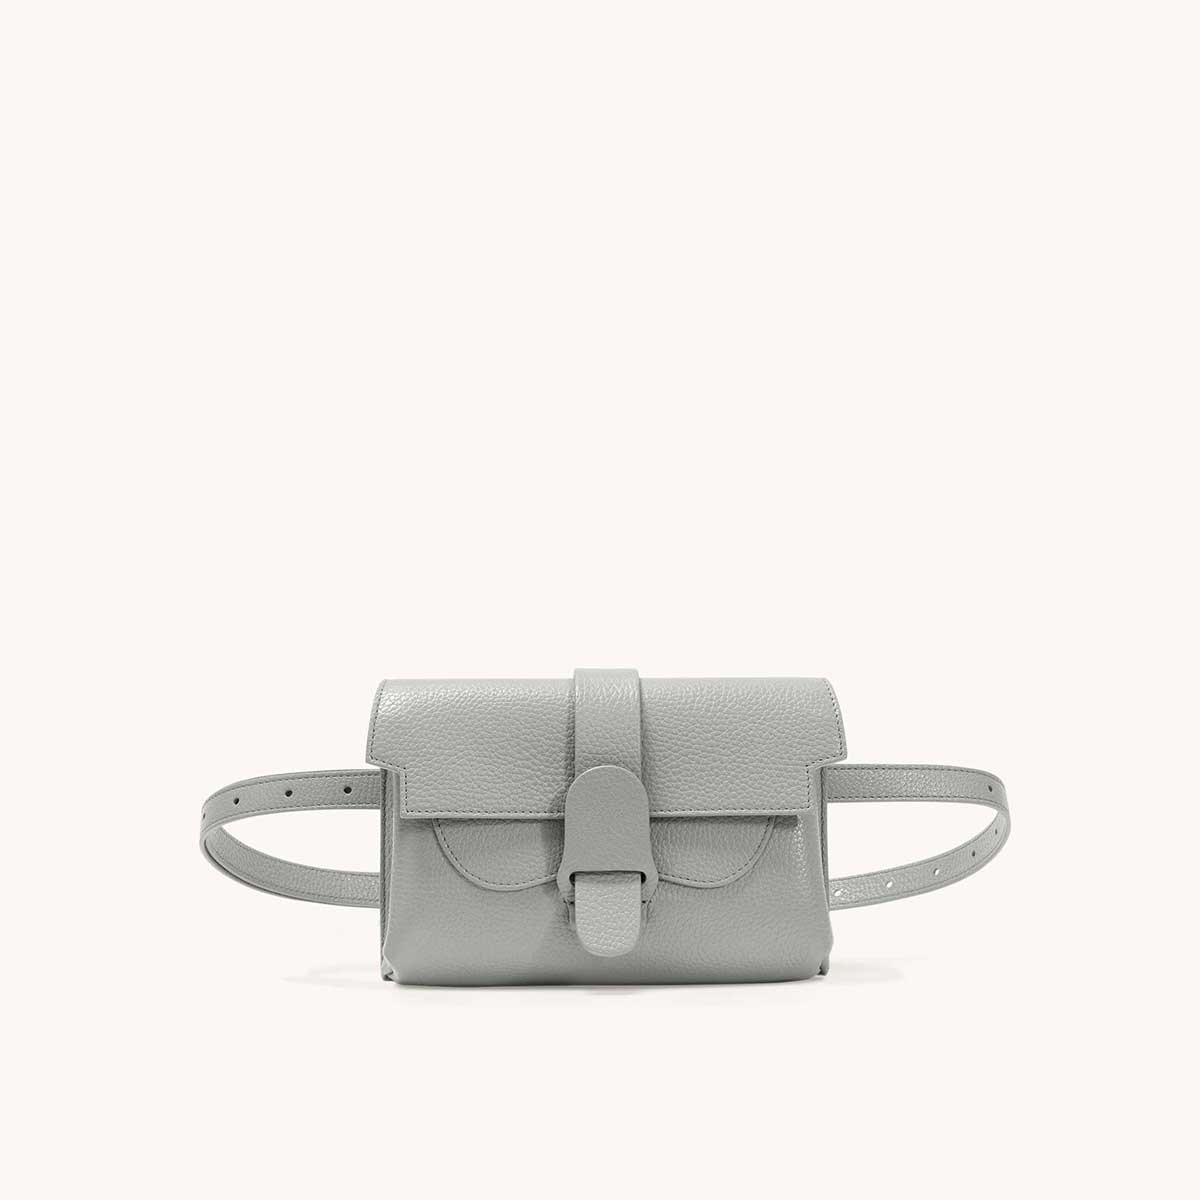 This Aria belt bag is so beautiful and looks amazing with